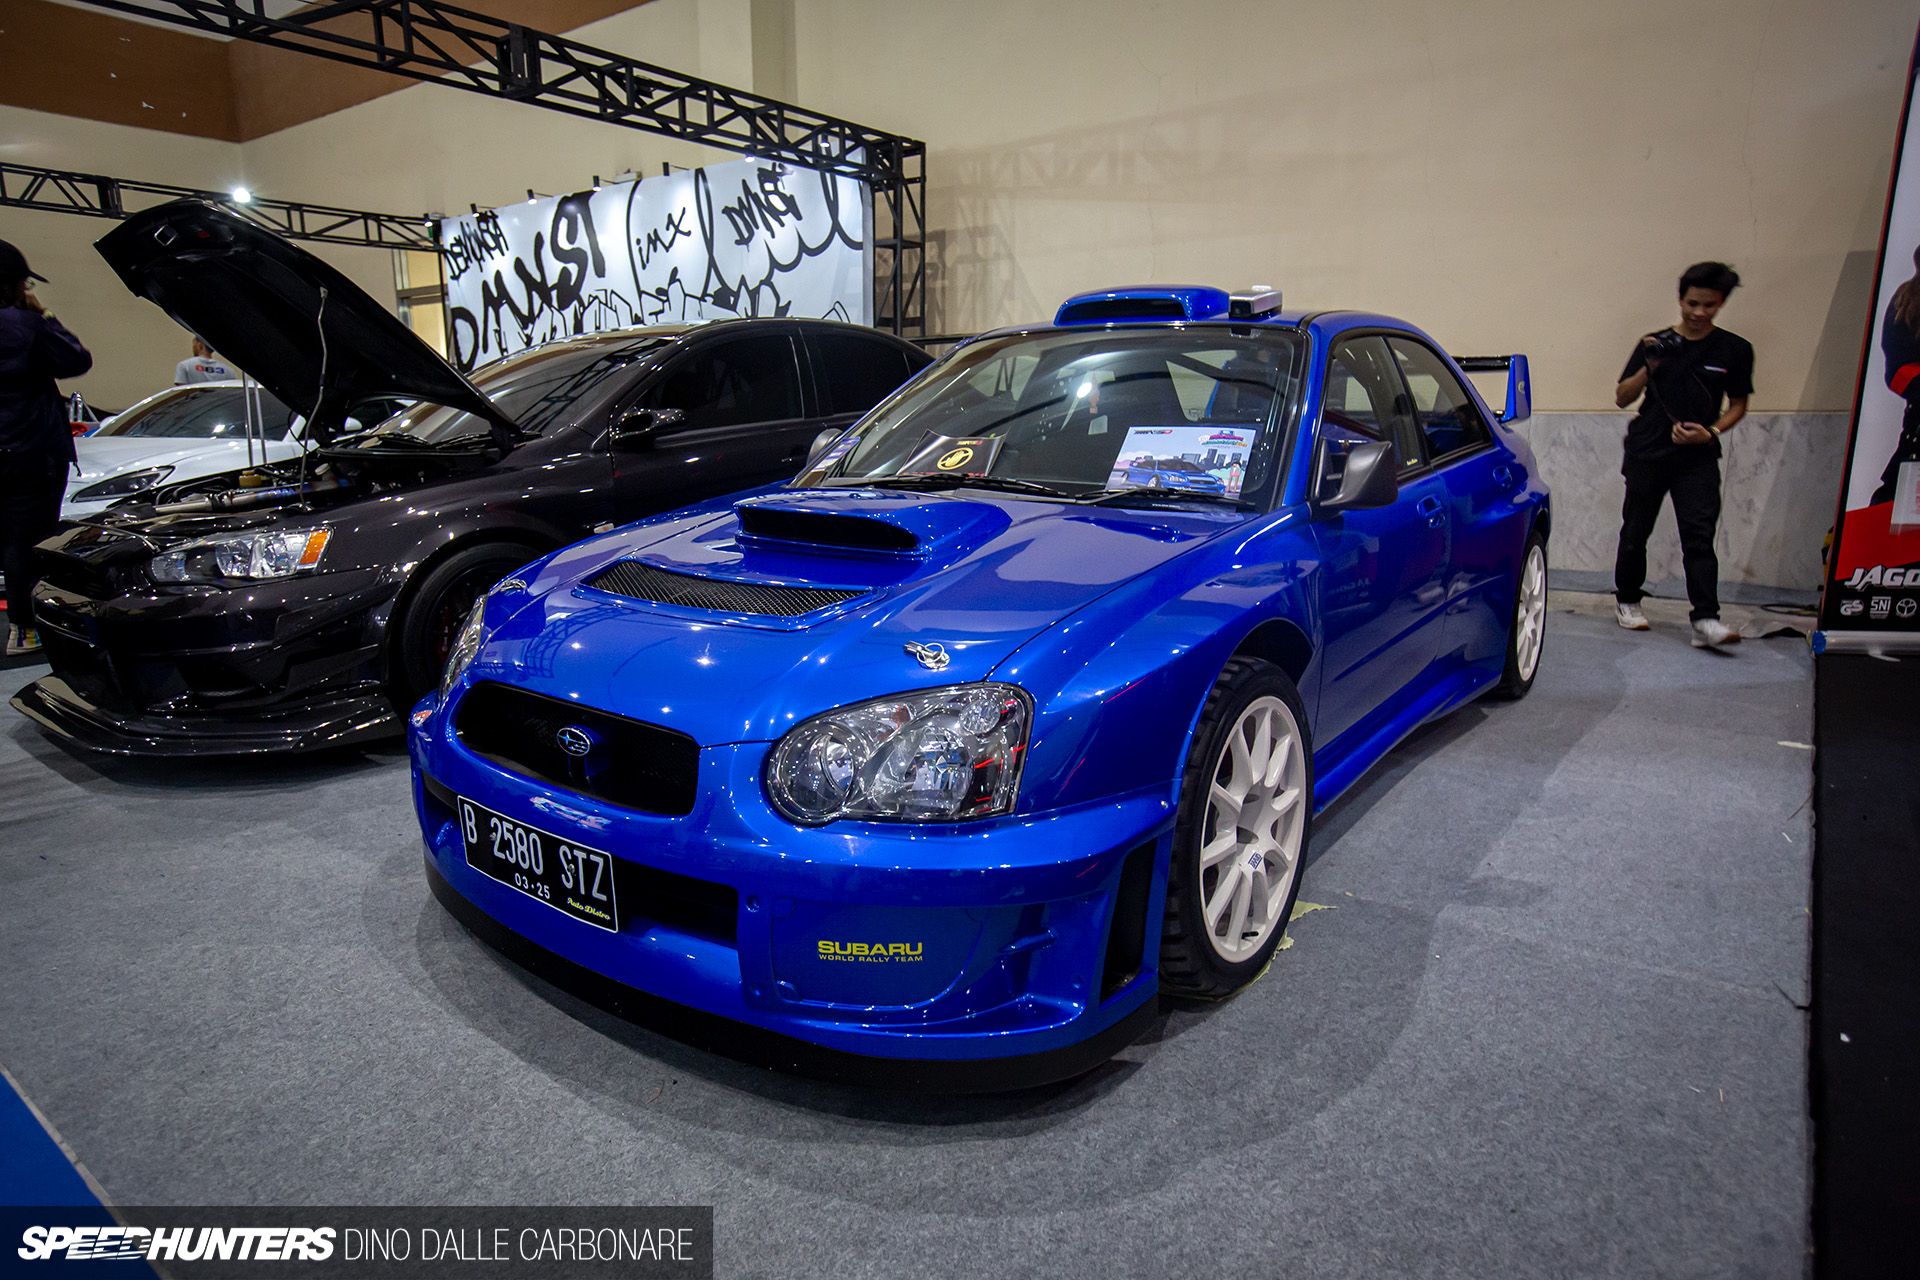 tuner car, liberty walk, jdm, jakarta, indonesia modification & lifestyle expo, indonesia, imx 2023, imx, car culture, indonesia is a tuner car paradise